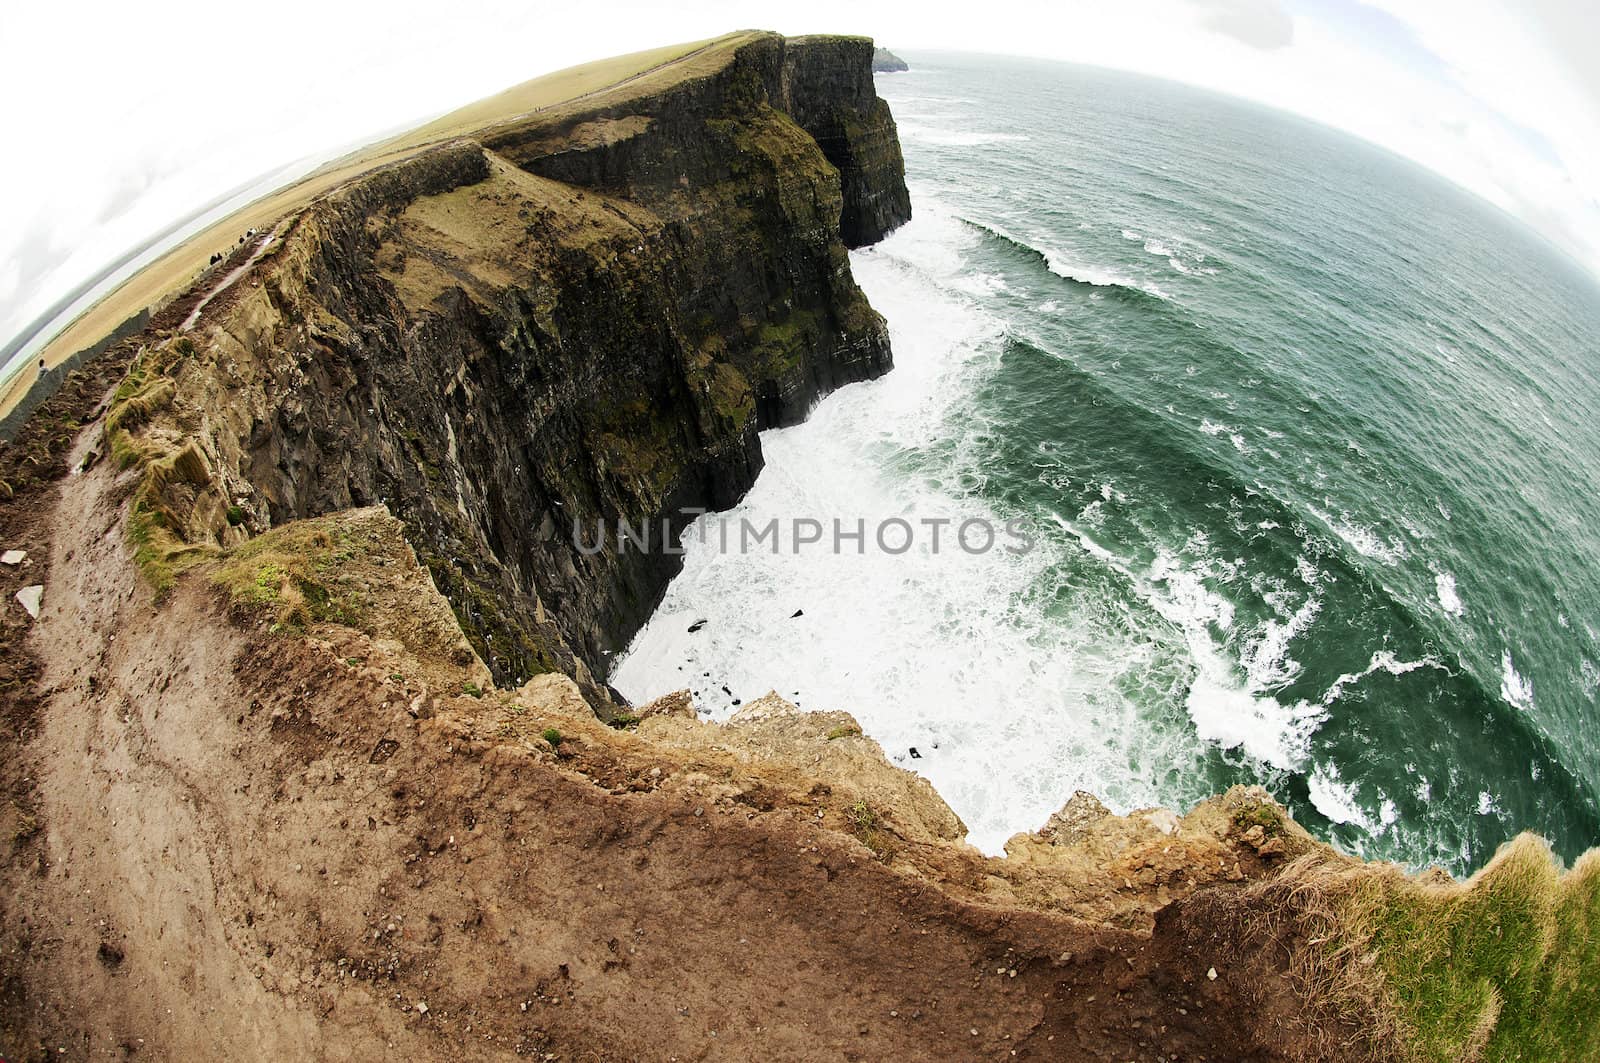 The Cliffs of Moher (Irish: Aillte an Mhothair) are located at the southwestern edge of the Burren region in County Clare, Ireland. They rise 120 metres (390 ft) above the Atlantic Ocean at Hag's Head, and reach their maximum height of 214 metres (702 ft) just north of O'Brien's Tower.